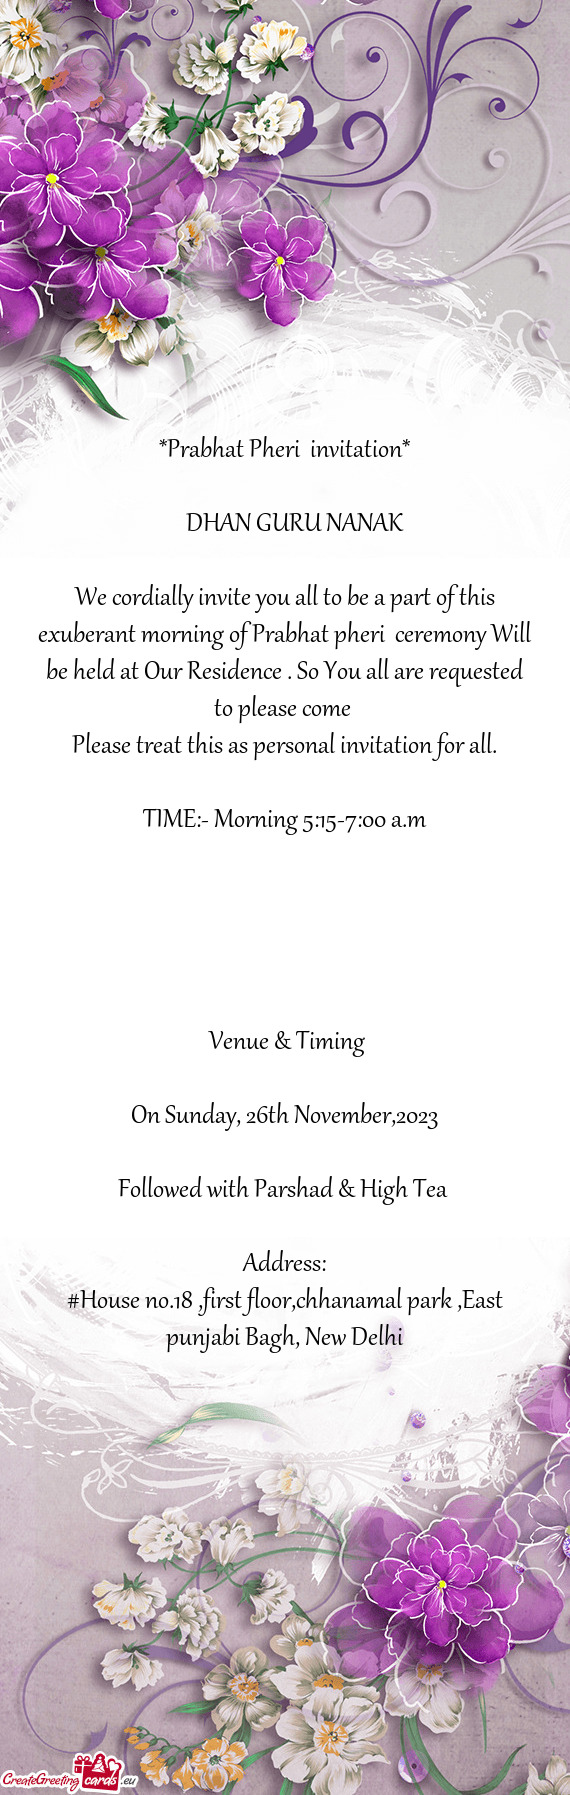 We cordially invite you all to be a part of this exuberant morning of Prabhat pheri ceremony Will b